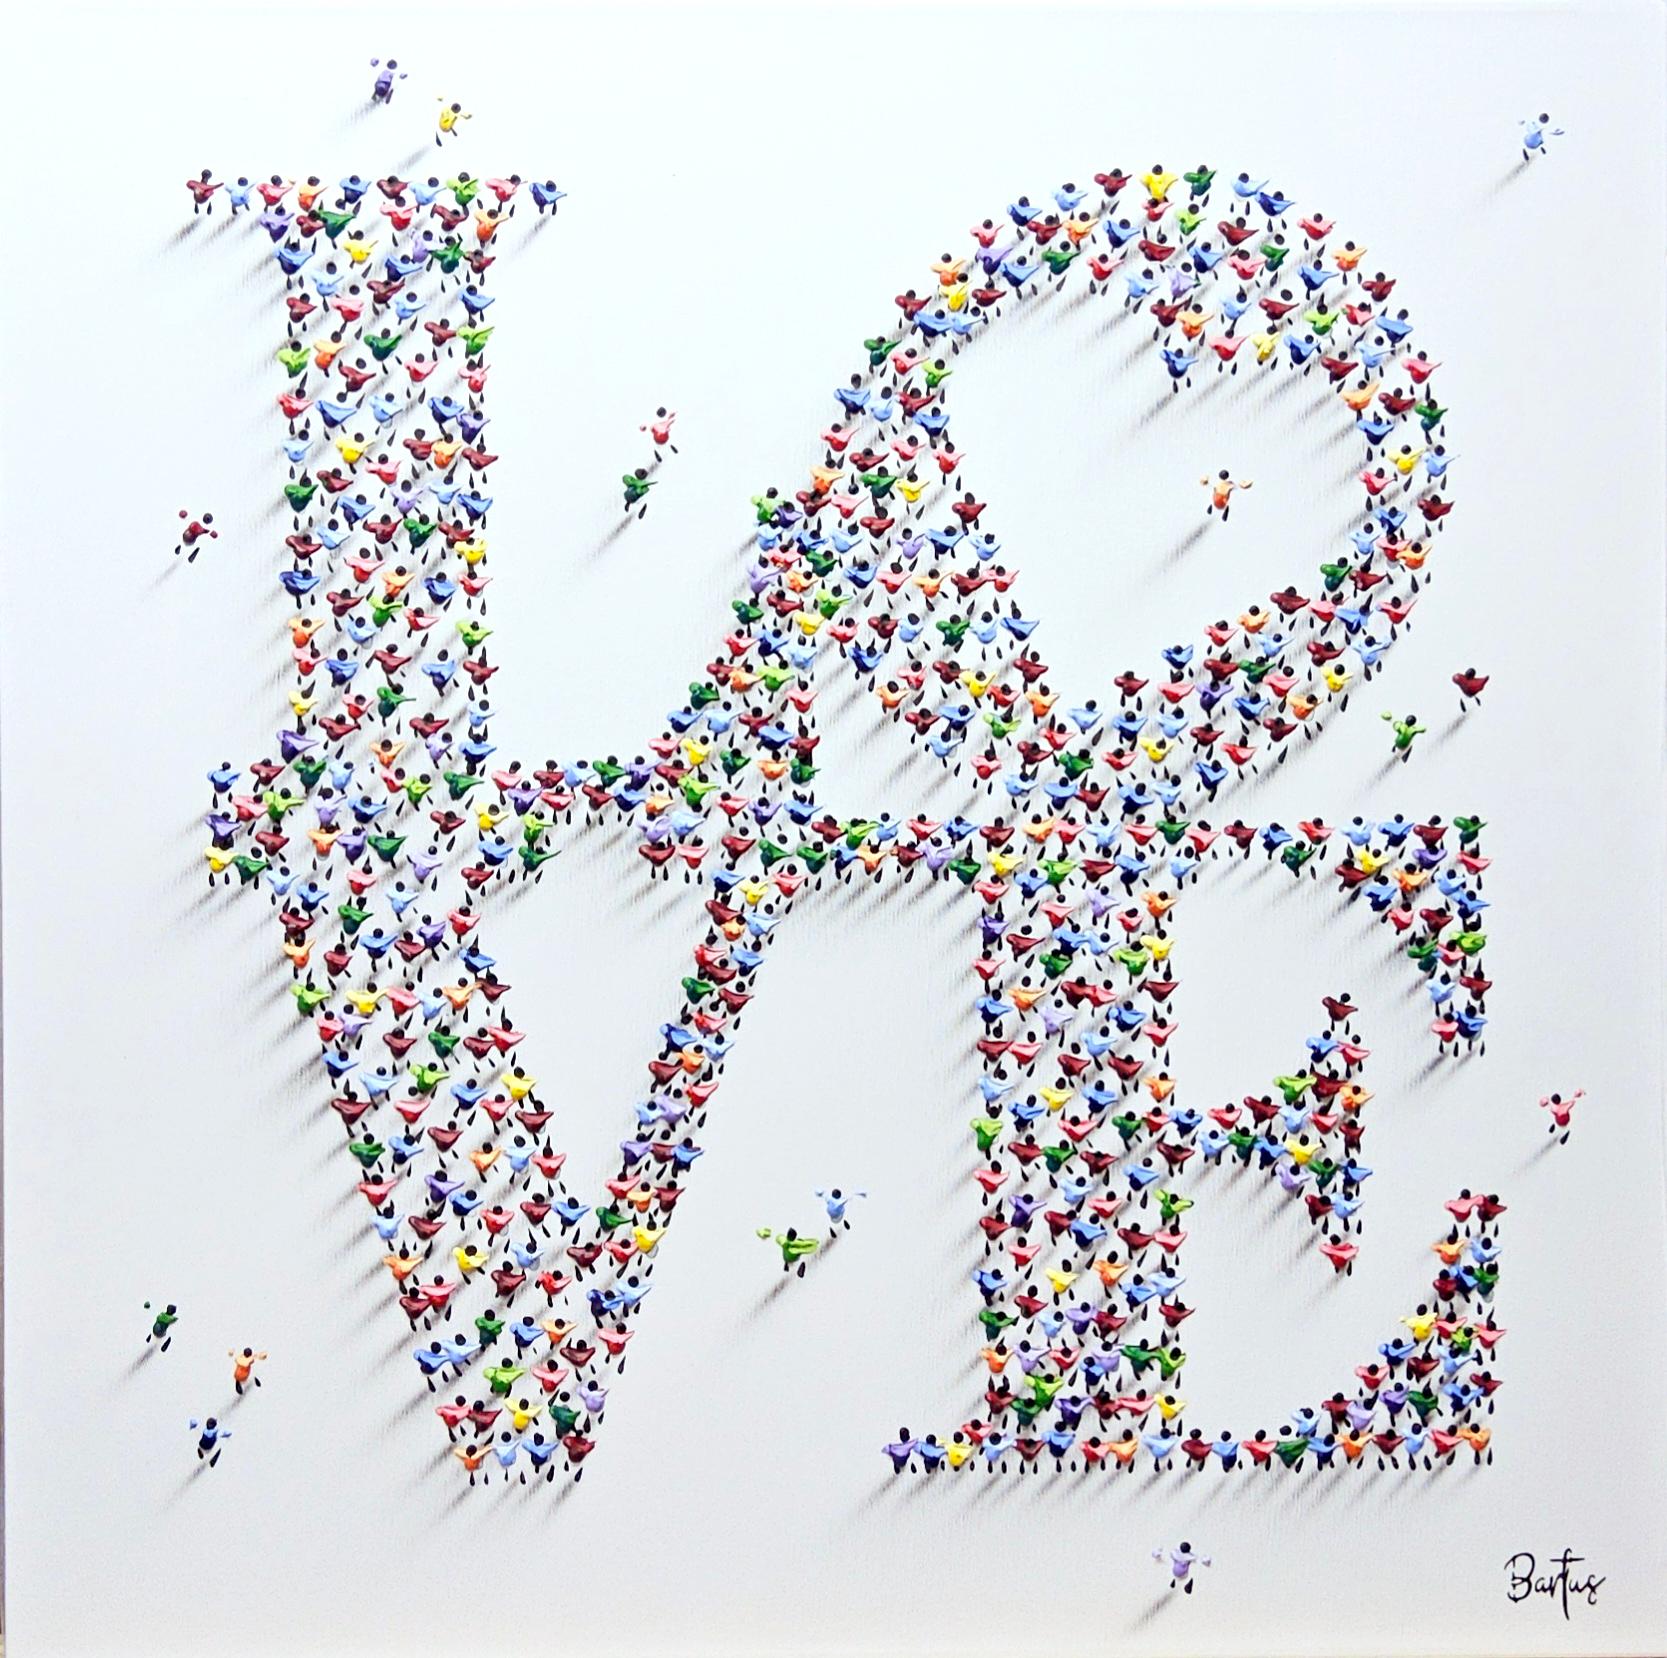 This piece, "Loving Heart", 32 x 32 mixed media painting on canvas by artist Francisco Bartus. Featured is the word LOVE, stacked as a square, made up of individual helpings of paint, strategically placed and formed to create the impression of tiny